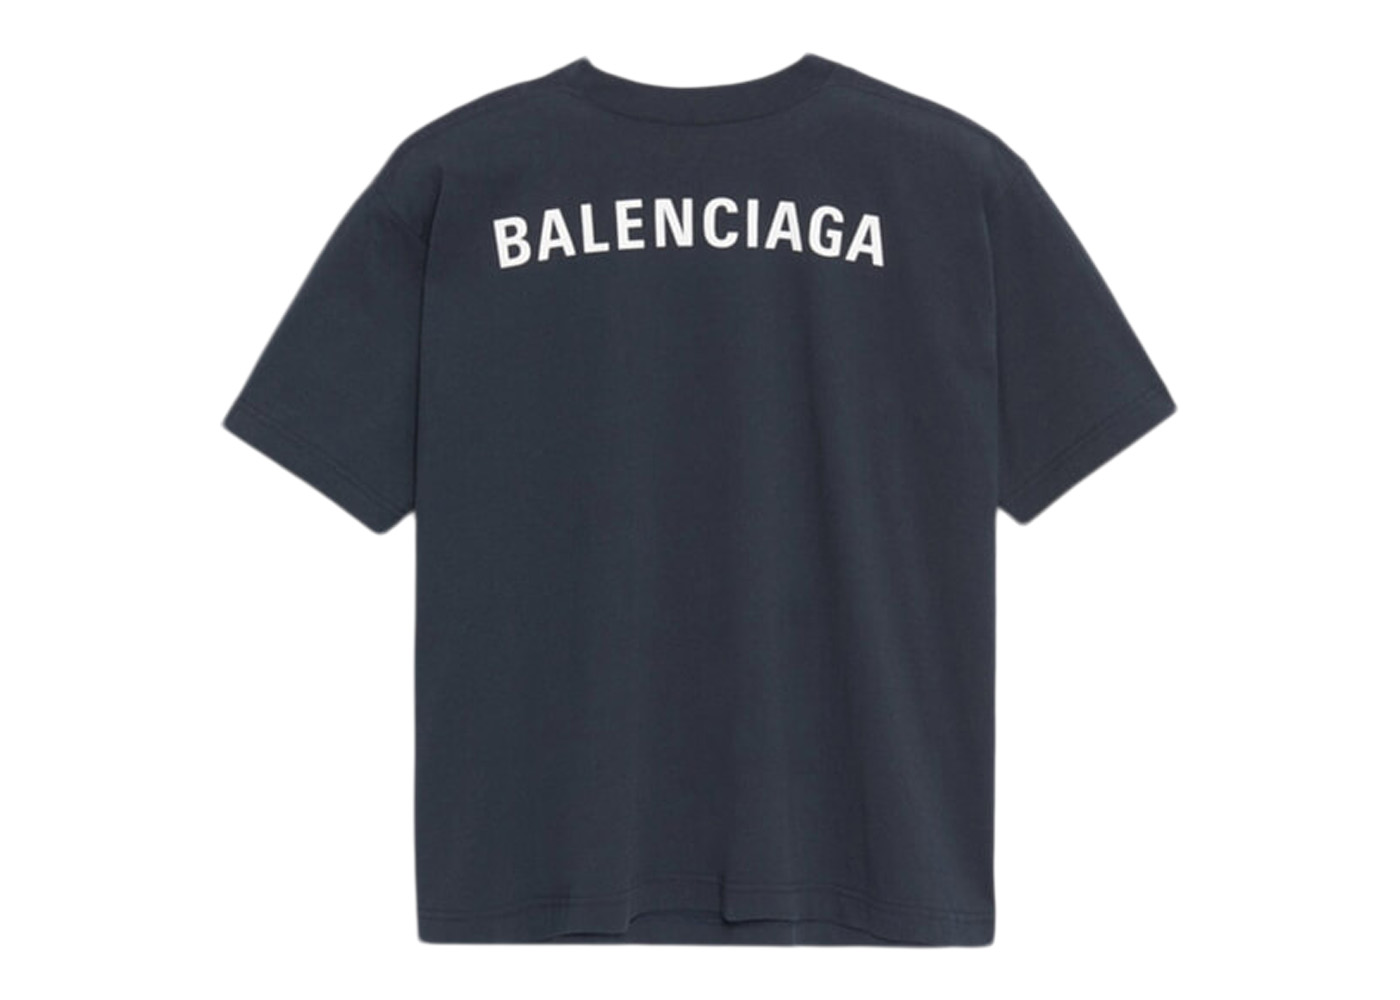 BALENCIAGA TSHIRT SS23  Read Description For Details VISIT OUR PROFILE  FOR MORE ITEMS AVAILABLE  for Sale in Pompano Beach FL  OfferUp